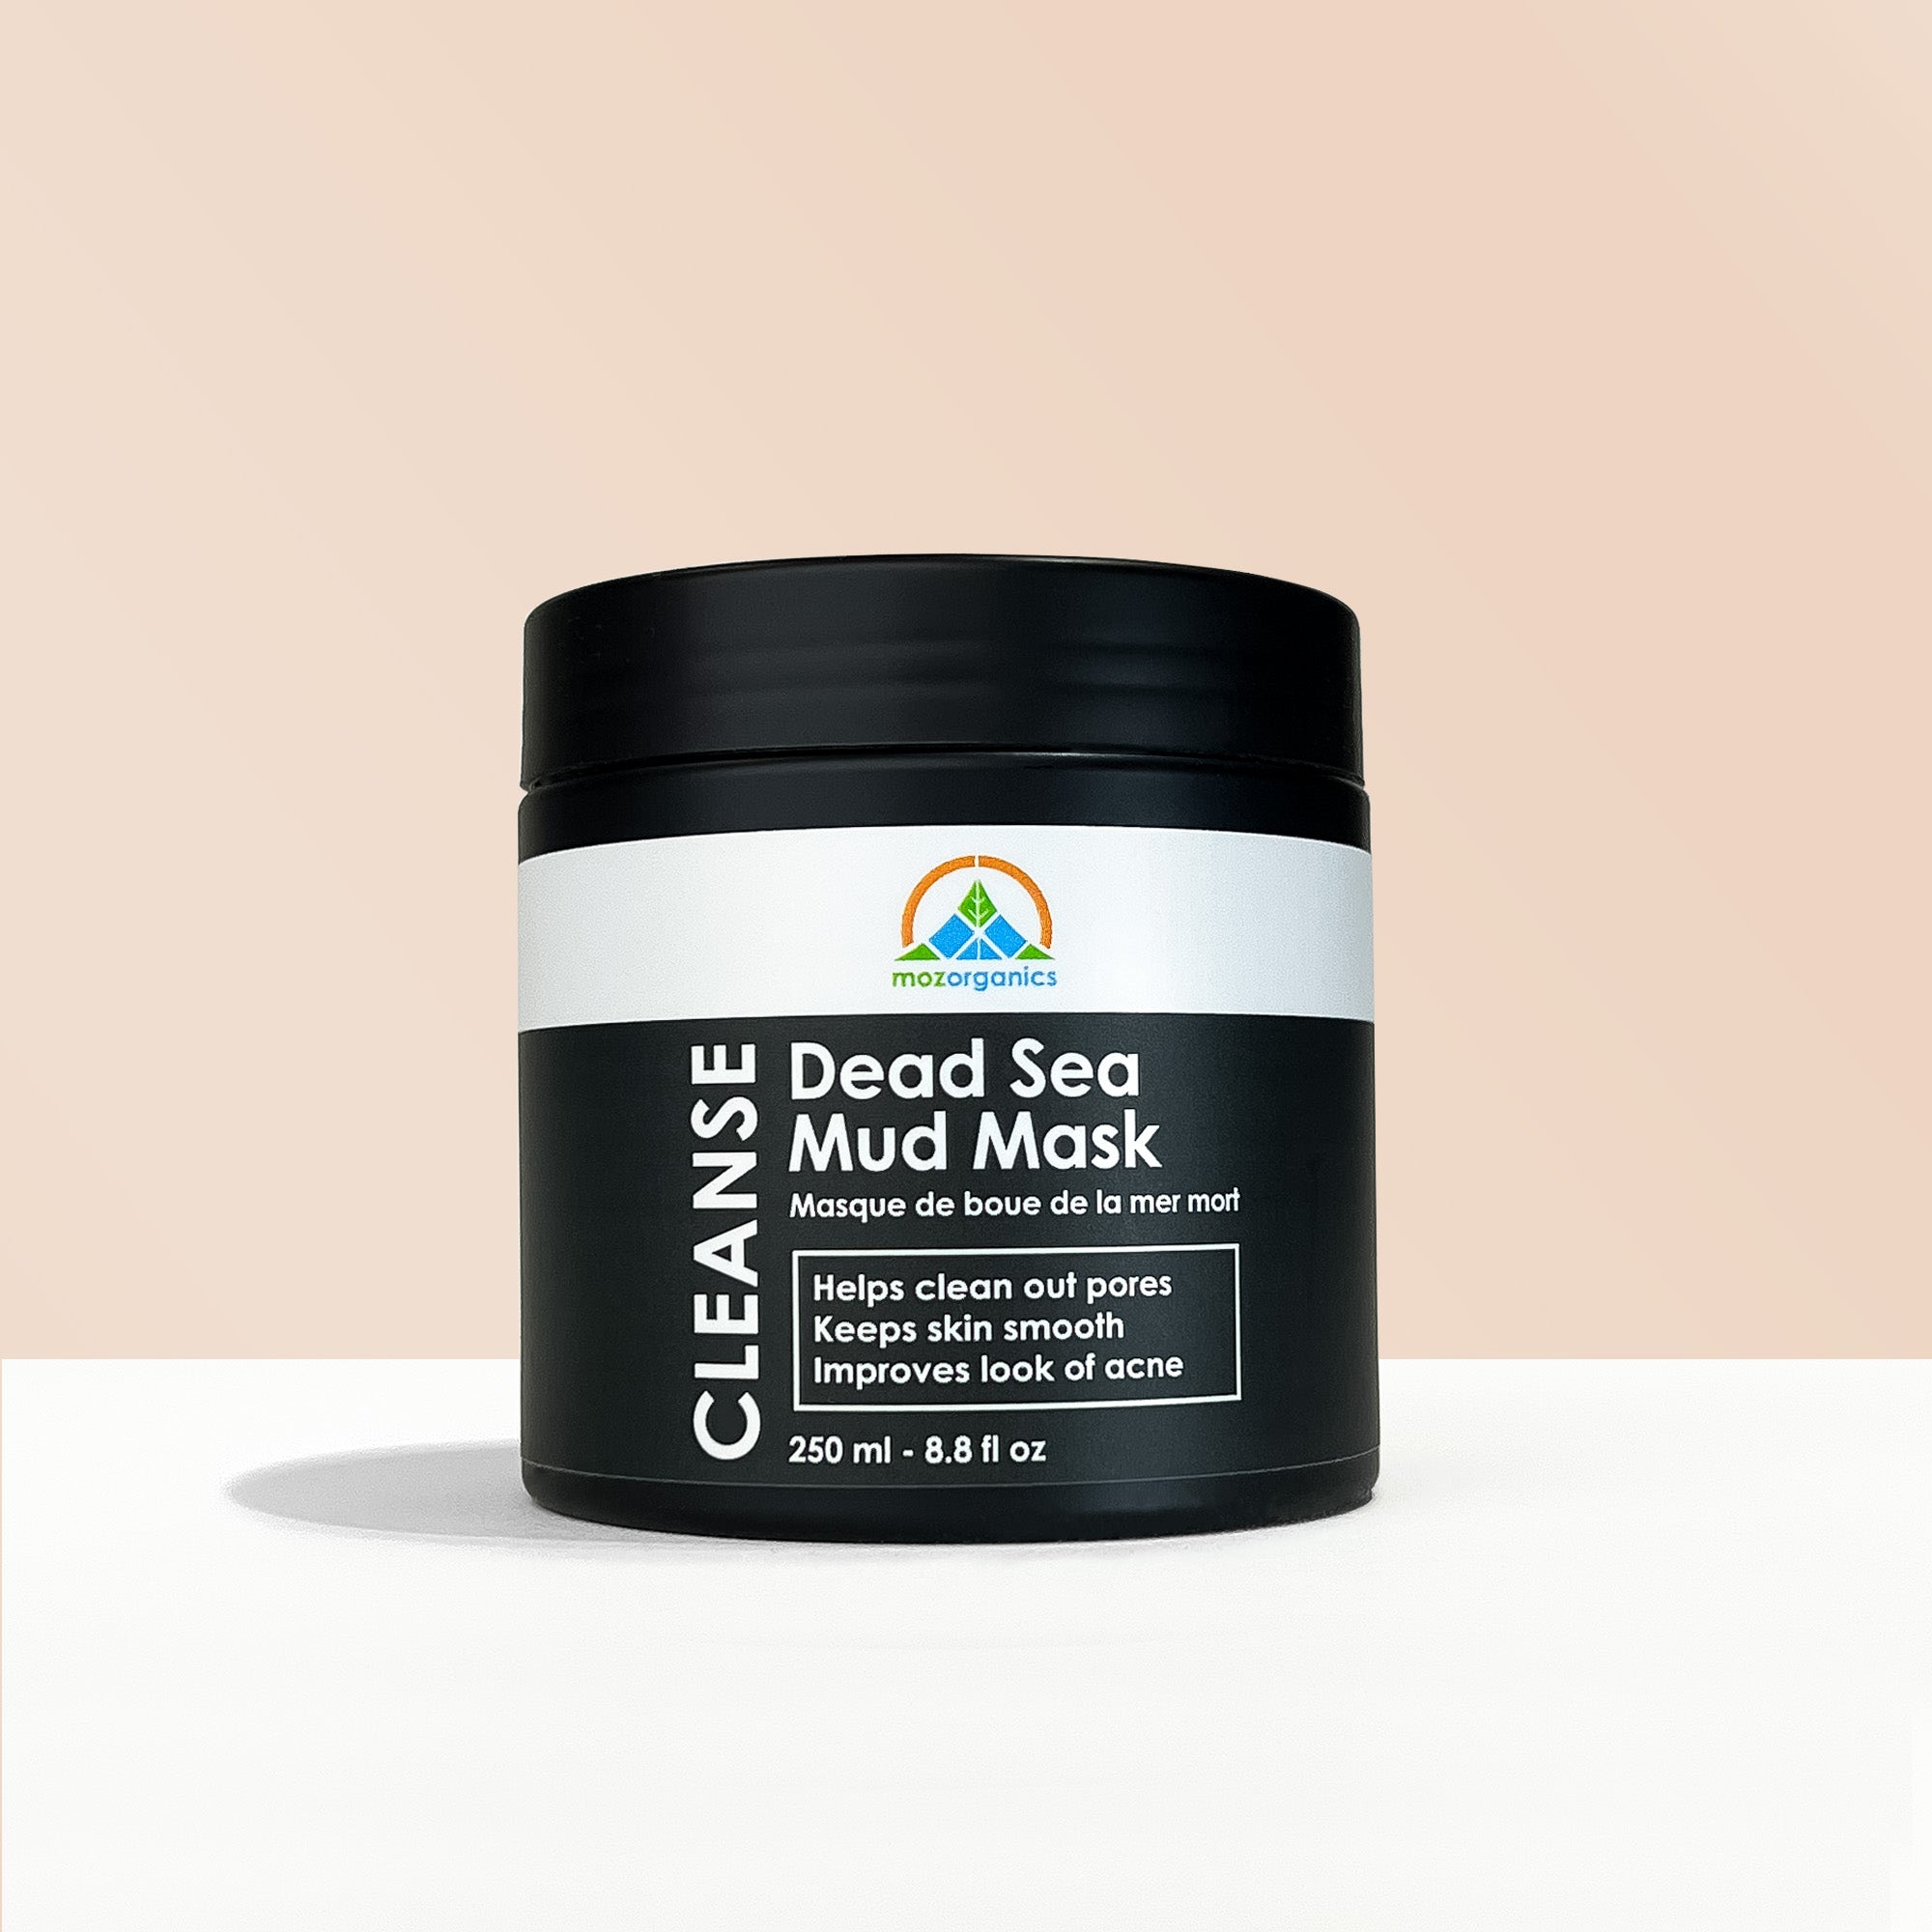 Dead Sea Mud Mask for Purifying Skin deep pore cleansing and acne treatment